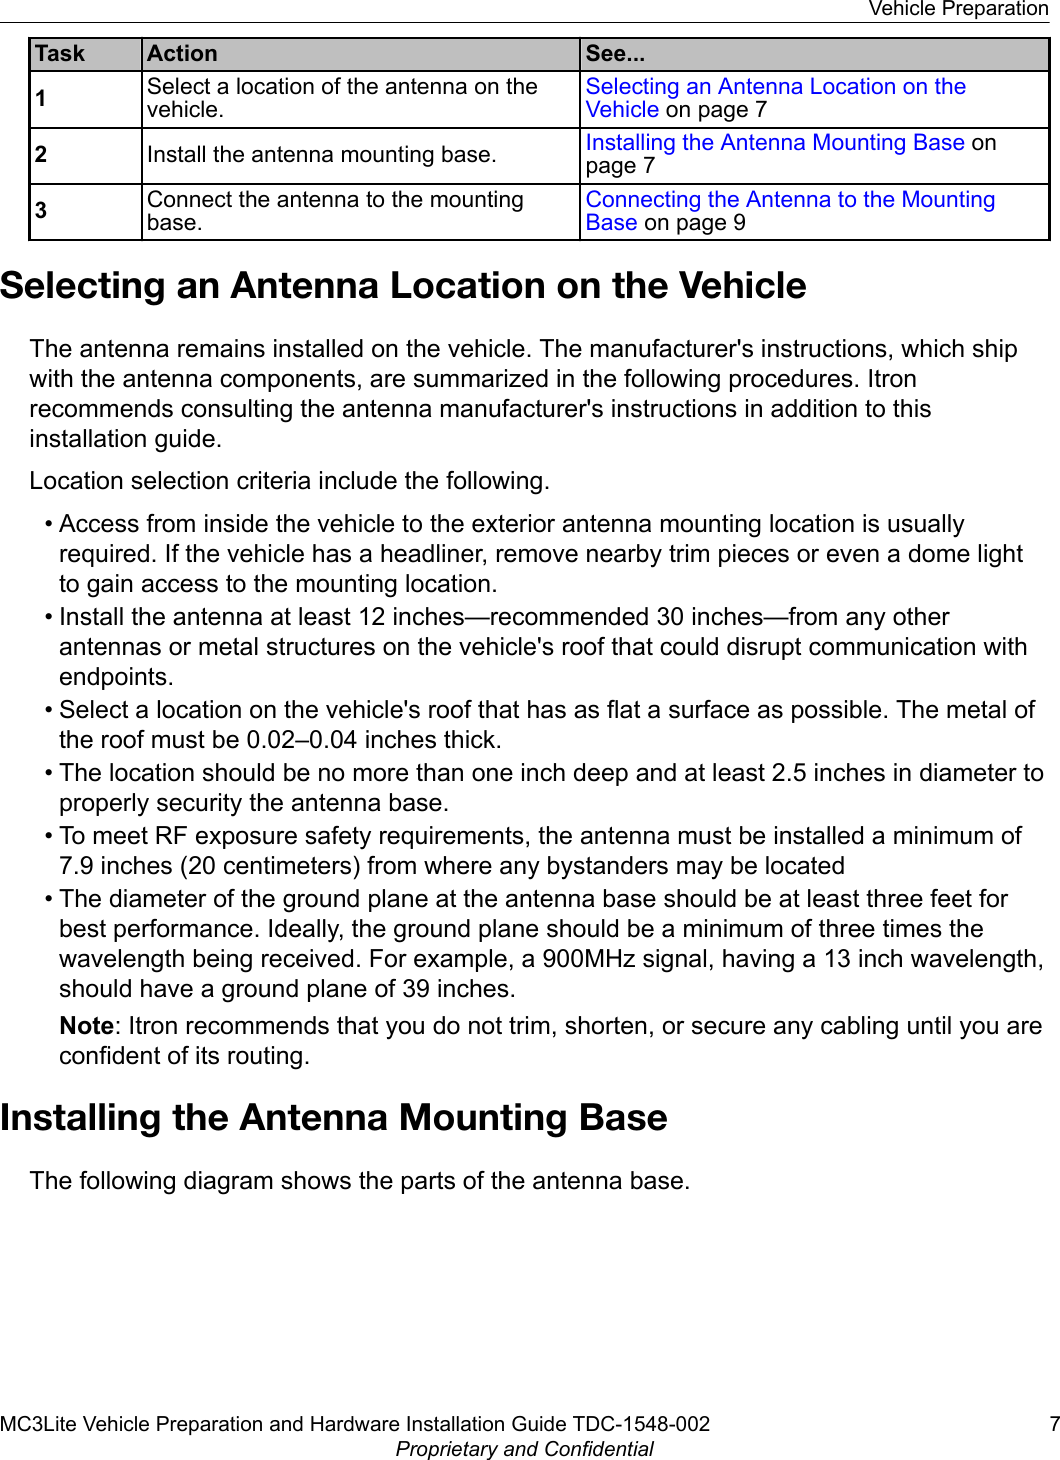 Task Action See...1Select a location of the antenna on thevehicle.Selecting an Antenna Location on theVehicle on page 72Install the antenna mounting base. Installing the Antenna Mounting Base onpage 73Connect the antenna to the mountingbase.Connecting the Antenna to the MountingBase on page 9Selecting an Antenna Location on the VehicleThe antenna remains installed on the vehicle. The manufacturer&apos;s instructions, which shipwith the antenna components, are summarized in the following procedures. Itronrecommends consulting the antenna manufacturer&apos;s instructions in addition to thisinstallation guide.Location selection criteria include the following.• Access from inside the vehicle to the exterior antenna mounting location is usuallyrequired. If the vehicle has a headliner, remove nearby trim pieces or even a dome lightto gain access to the mounting location.• Install the antenna at least 12 inches—recommended 30 inches—from any otherantennas or metal structures on the vehicle&apos;s roof that could disrupt communication withendpoints.• Select a location on the vehicle&apos;s roof that has as flat a surface as possible. The metal ofthe roof must be 0.02–0.04 inches thick.• The location should be no more than one inch deep and at least 2.5 inches in diameter toproperly security the antenna base.• To meet RF exposure safety requirements, the antenna must be installed a minimum of7.9 inches (20 centimeters) from where any bystanders may be located• The diameter of the ground plane at the antenna base should be at least three feet forbest performance. Ideally, the ground plane should be a minimum of three times thewavelength being received. For example, a 900MHz signal, having a 13 inch wavelength,should have a ground plane of 39 inches.Note: Itron recommends that you do not trim, shorten, or secure any cabling until you areconfident of its routing.Installing the Antenna Mounting BaseThe following diagram shows the parts of the antenna base.Vehicle PreparationMC3Lite Vehicle Preparation and Hardware Installation Guide TDC-1548-002 7Proprietary and Confidential